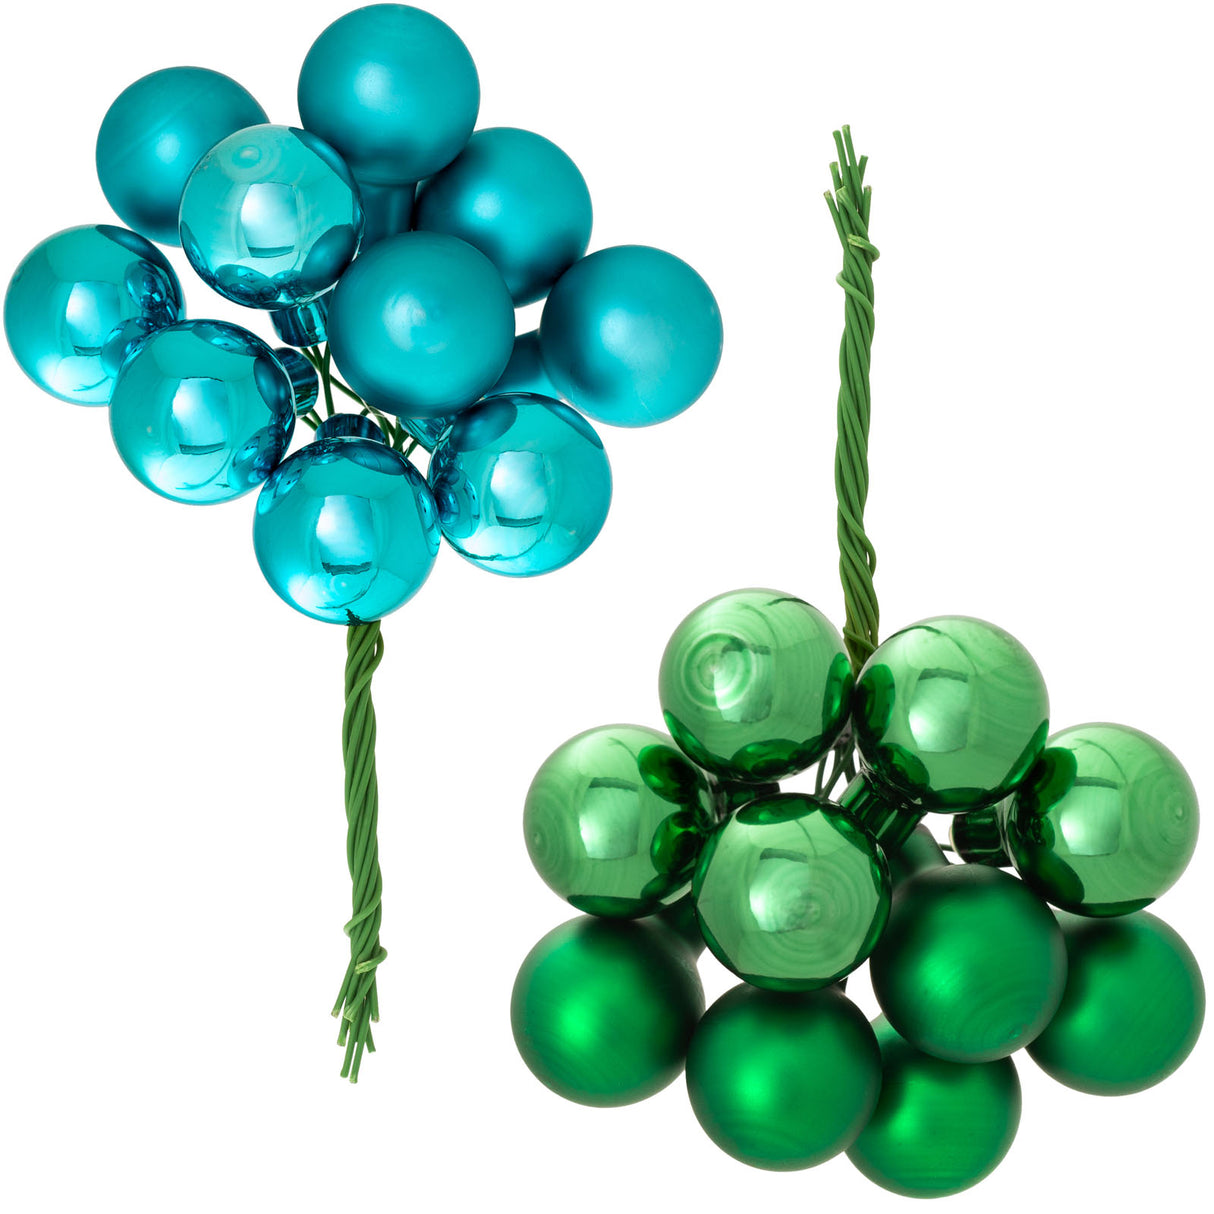 Emerald Green Glass Berry Cluster Baubles, 5 pack